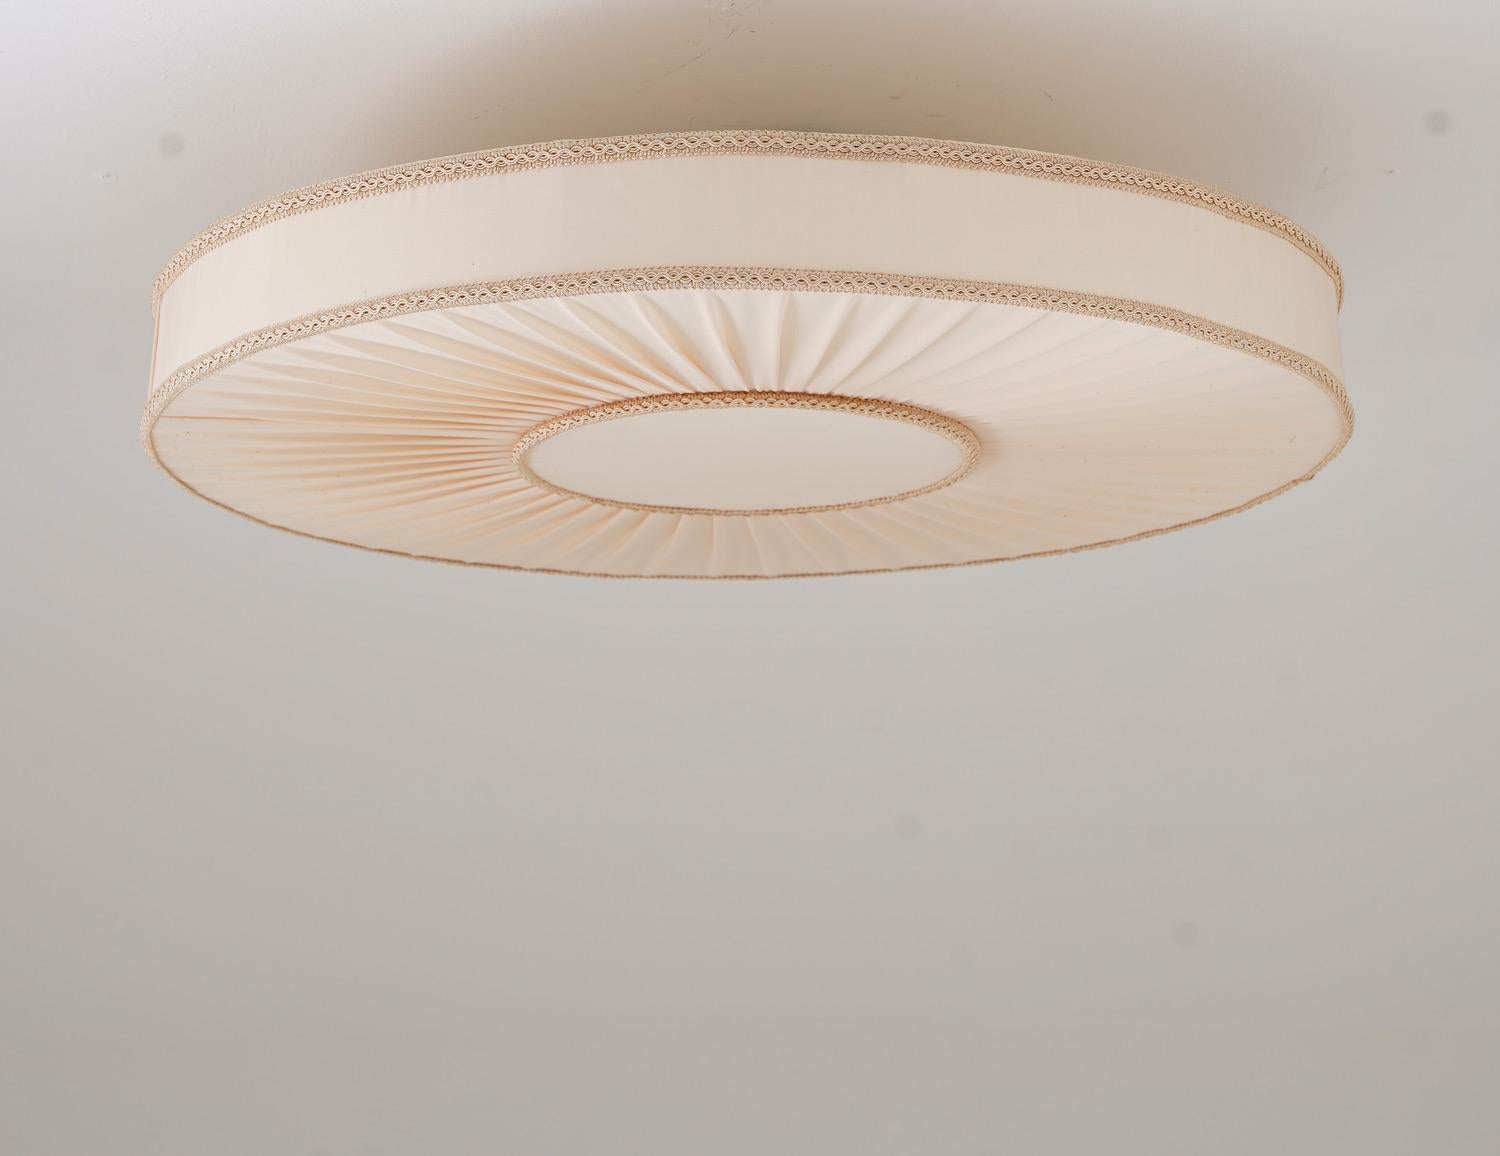 Large flush mount, manufactured in Sweden, 1950s.
The lamp consists of a large round pleated shade, hiding 6 light sources. 

Condition: Good original condition with several minor stains on the shade (which are too small to notice when it's up on